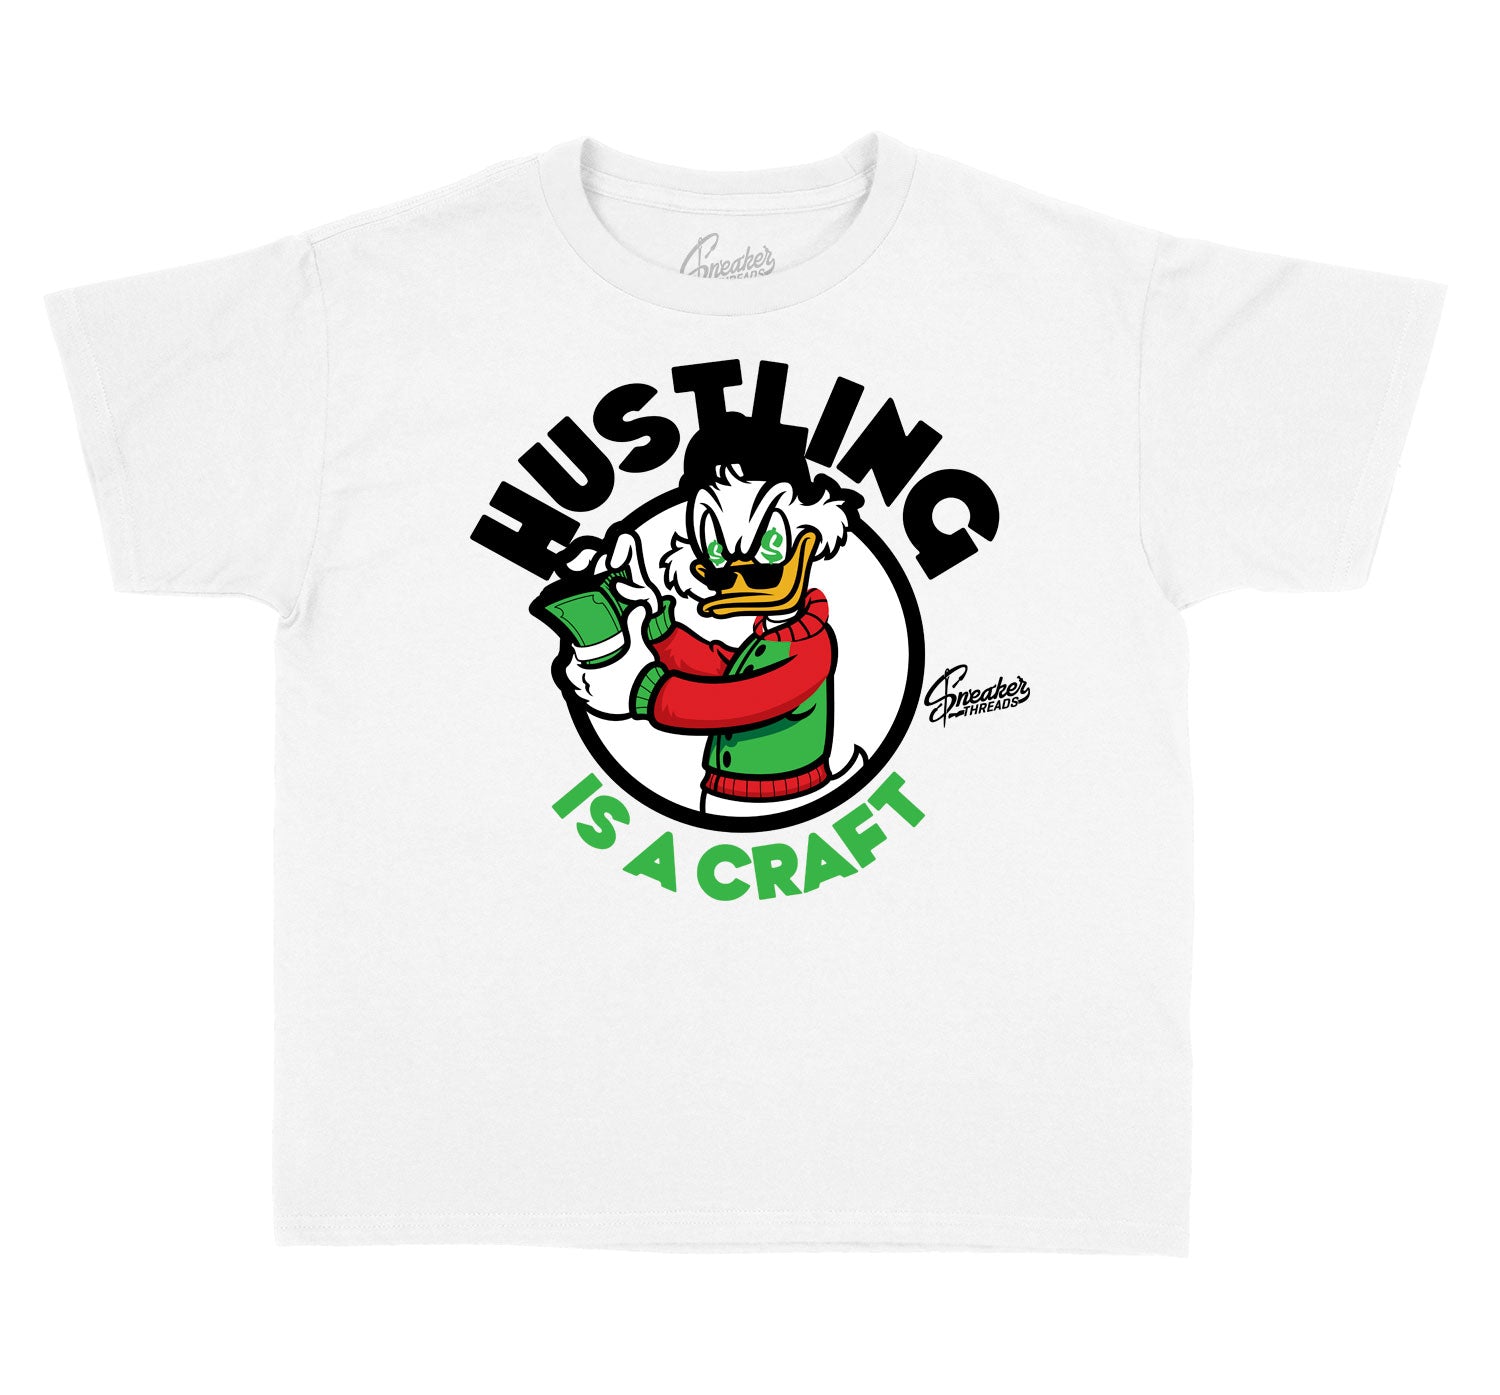 Kids Lucky Green 1 Shirt - Carfting - White